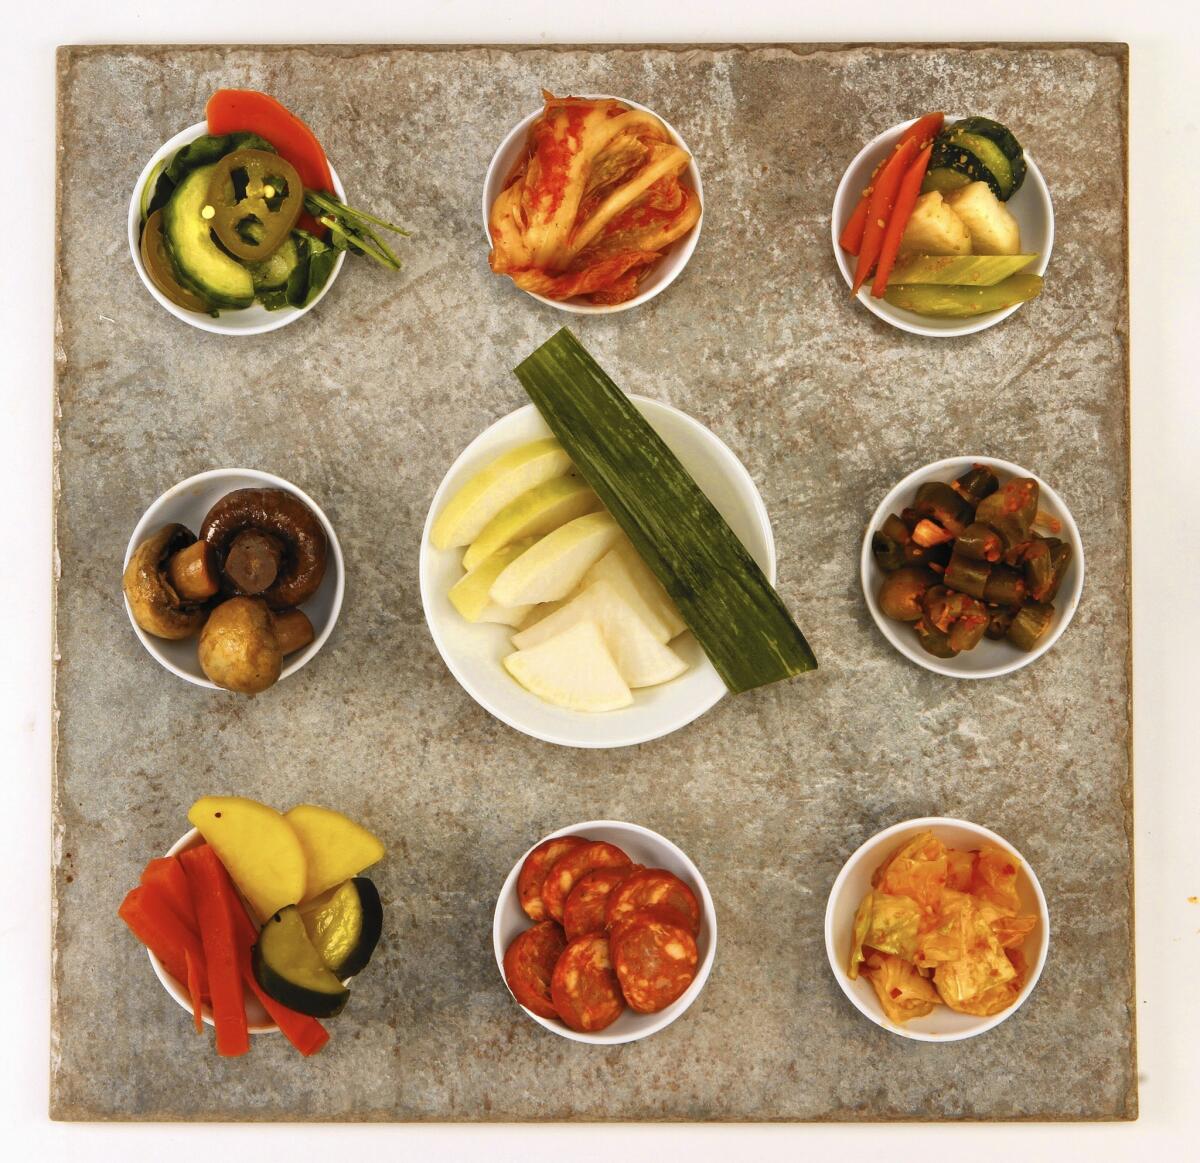 Los Angeles is home to a world of pickles, including escabeche, kimchi and nukazuke.